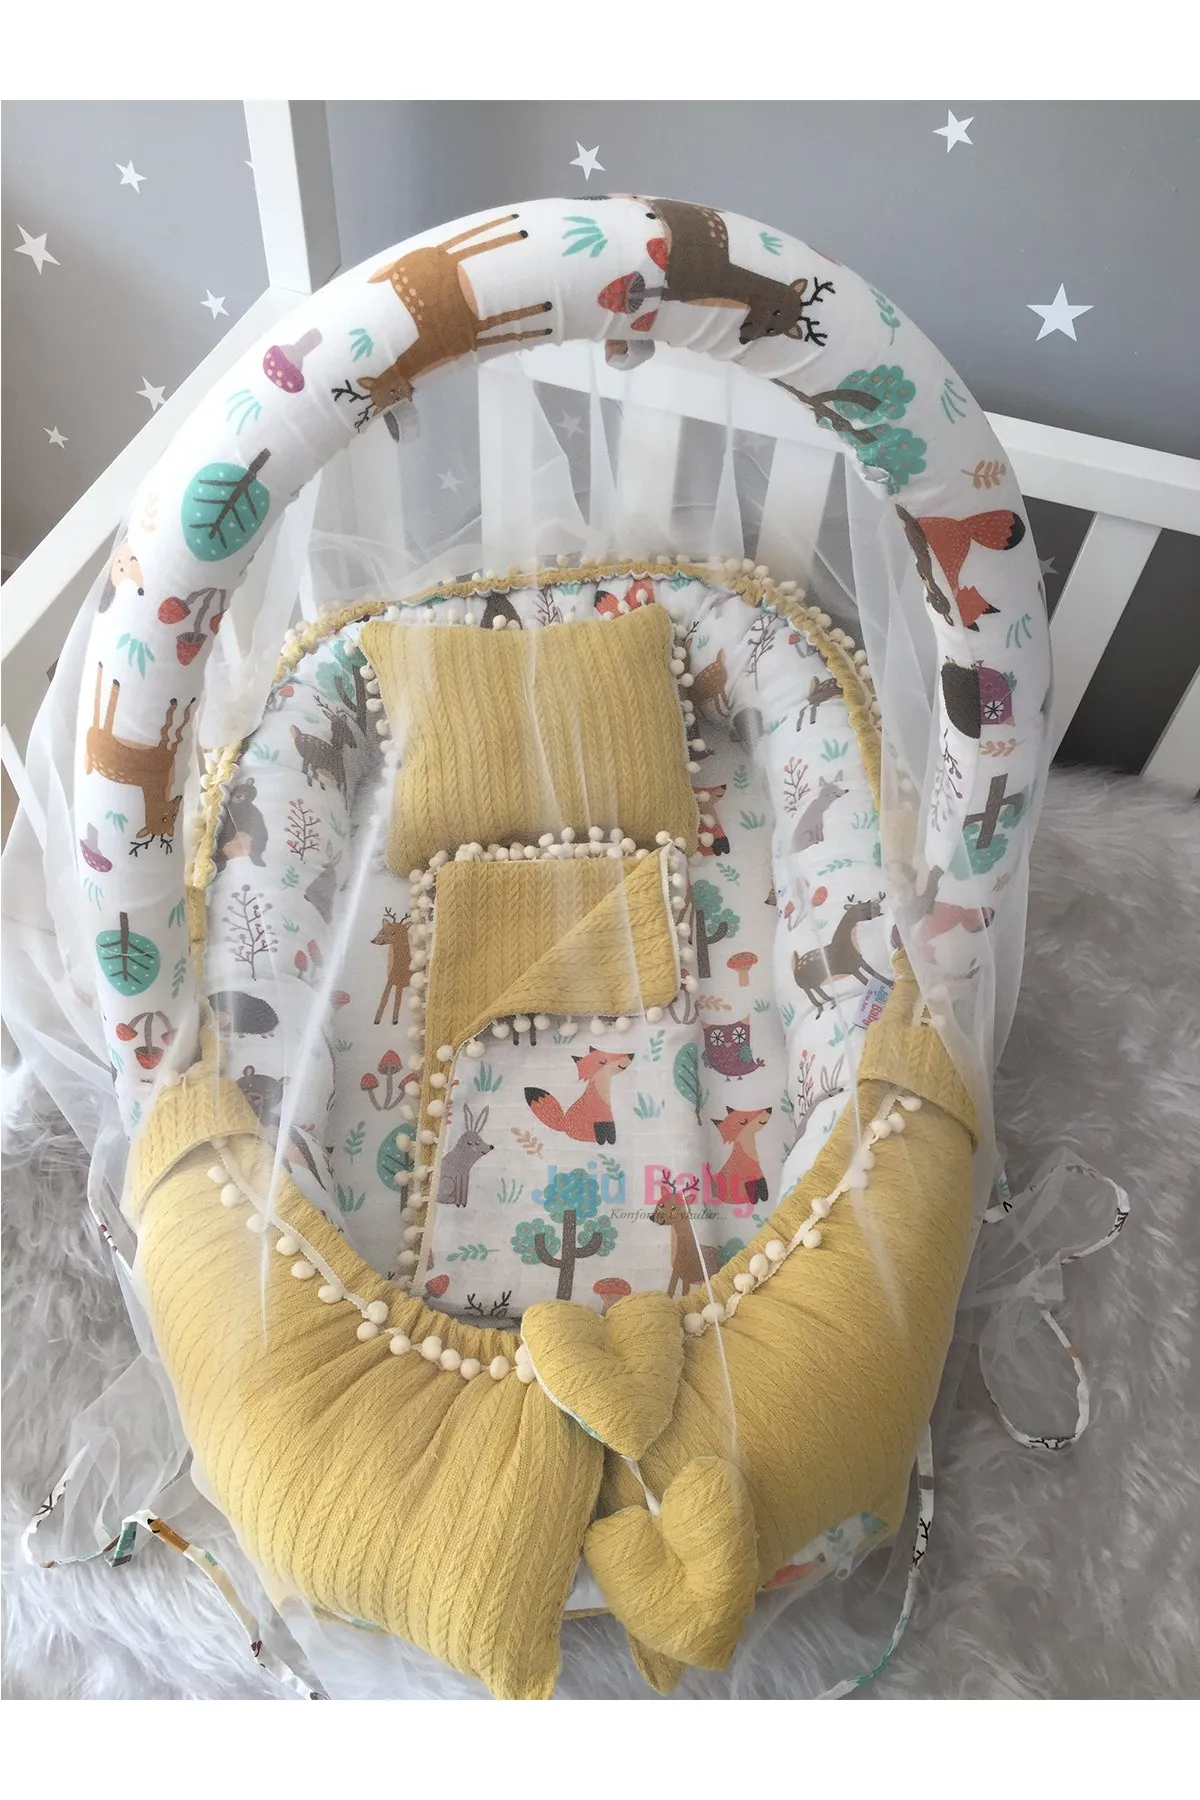 Jaju Baby Handmade Yellow Tricot Pique Fabric and Forest Muslin Fabric Pompom Babynest and Quilt Toy Apparatus and Tulle Set